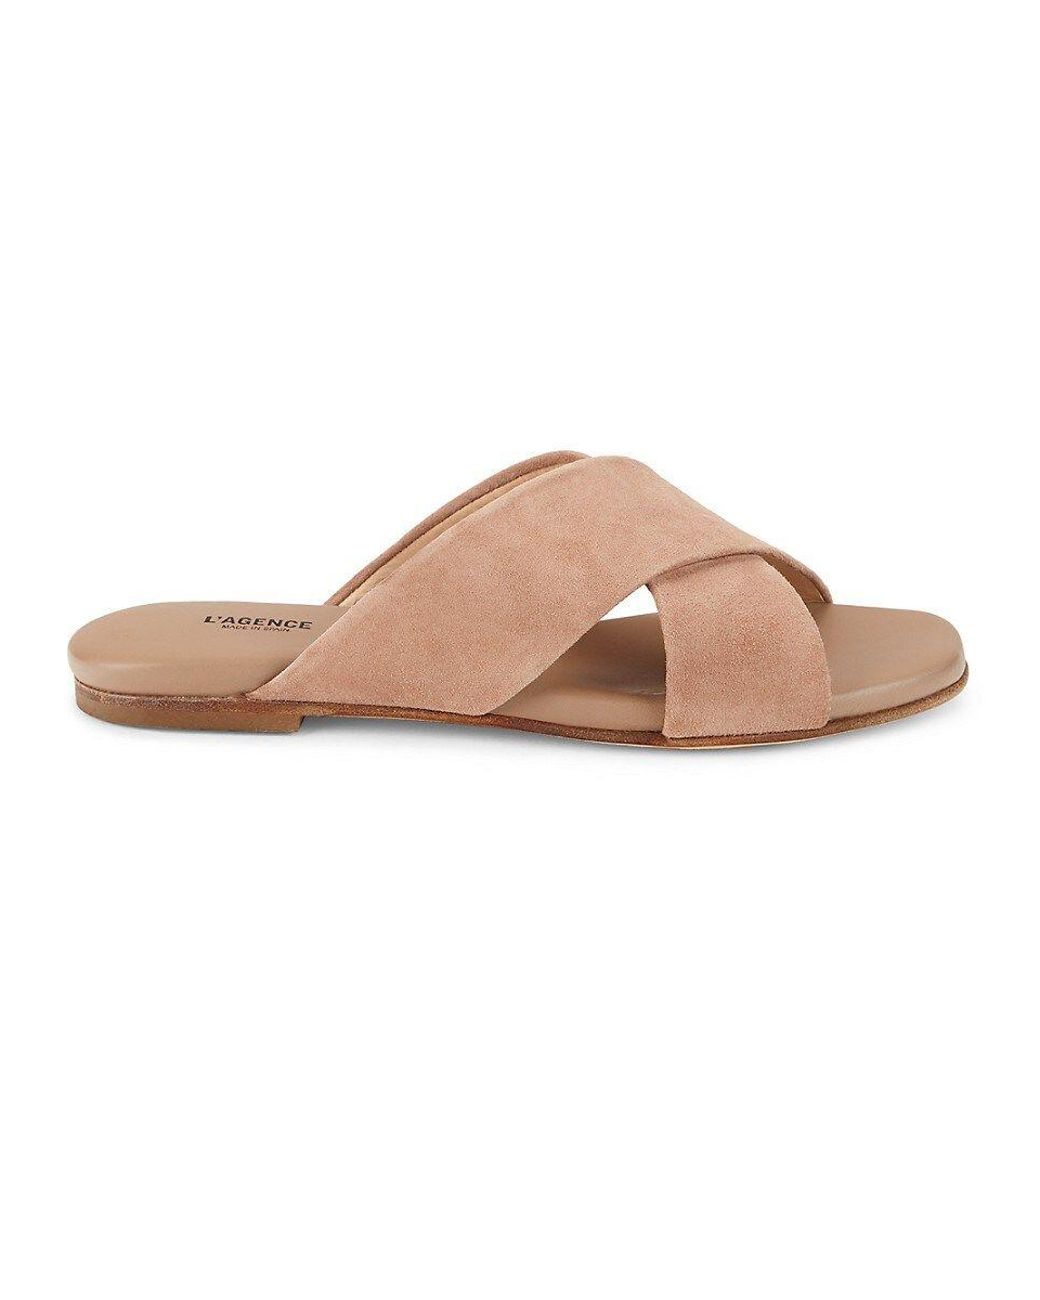 L'Agence Camila Suede Crossover Flat Sandals in Brown | Lyst